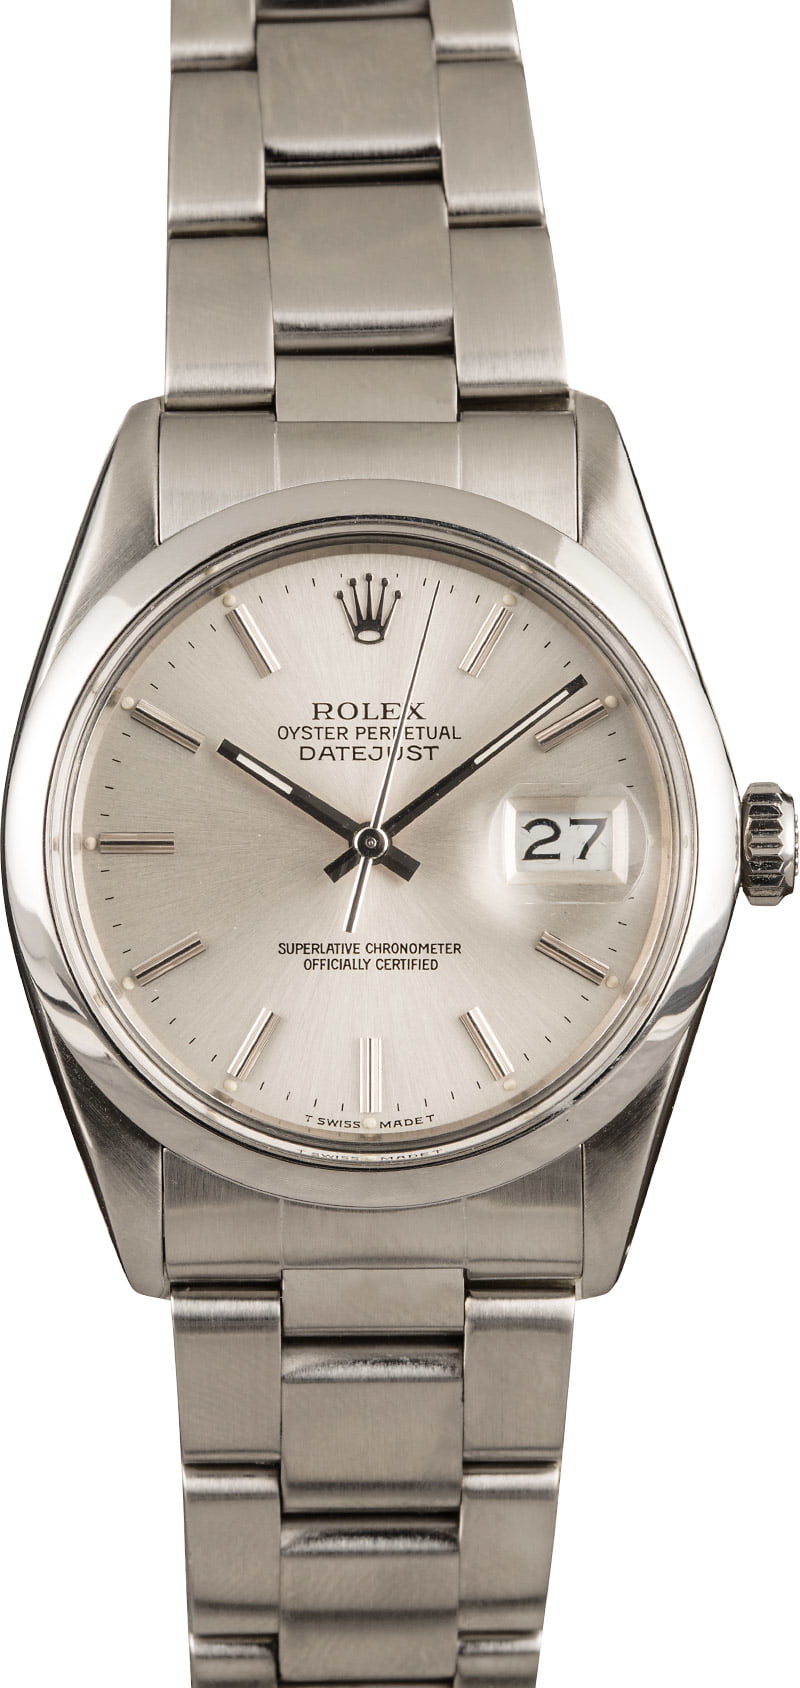 Rolex Datejust Celebrity Style Guide What models Bono 16200